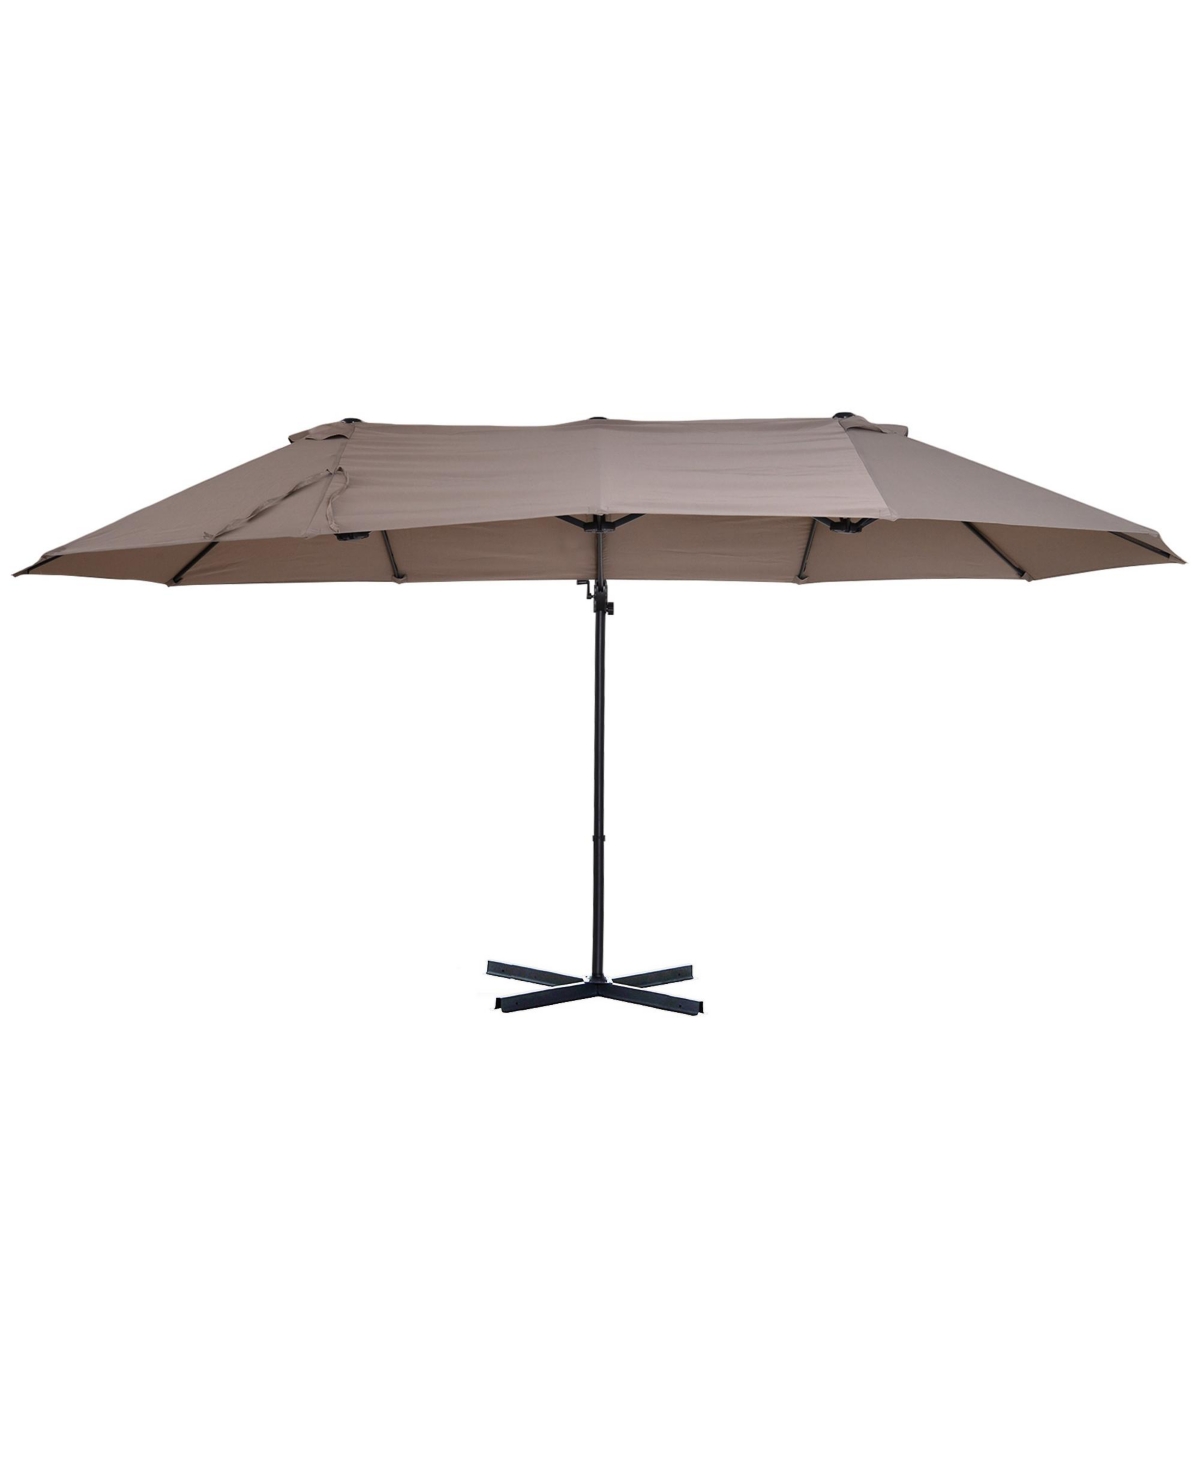 14.4' Patio Umbrella Double-Sided Outdoor Market Extra Large Umbrella with Crank, Cross Base for Deck, Lawn, Backyard and Pool, Brown - Brown